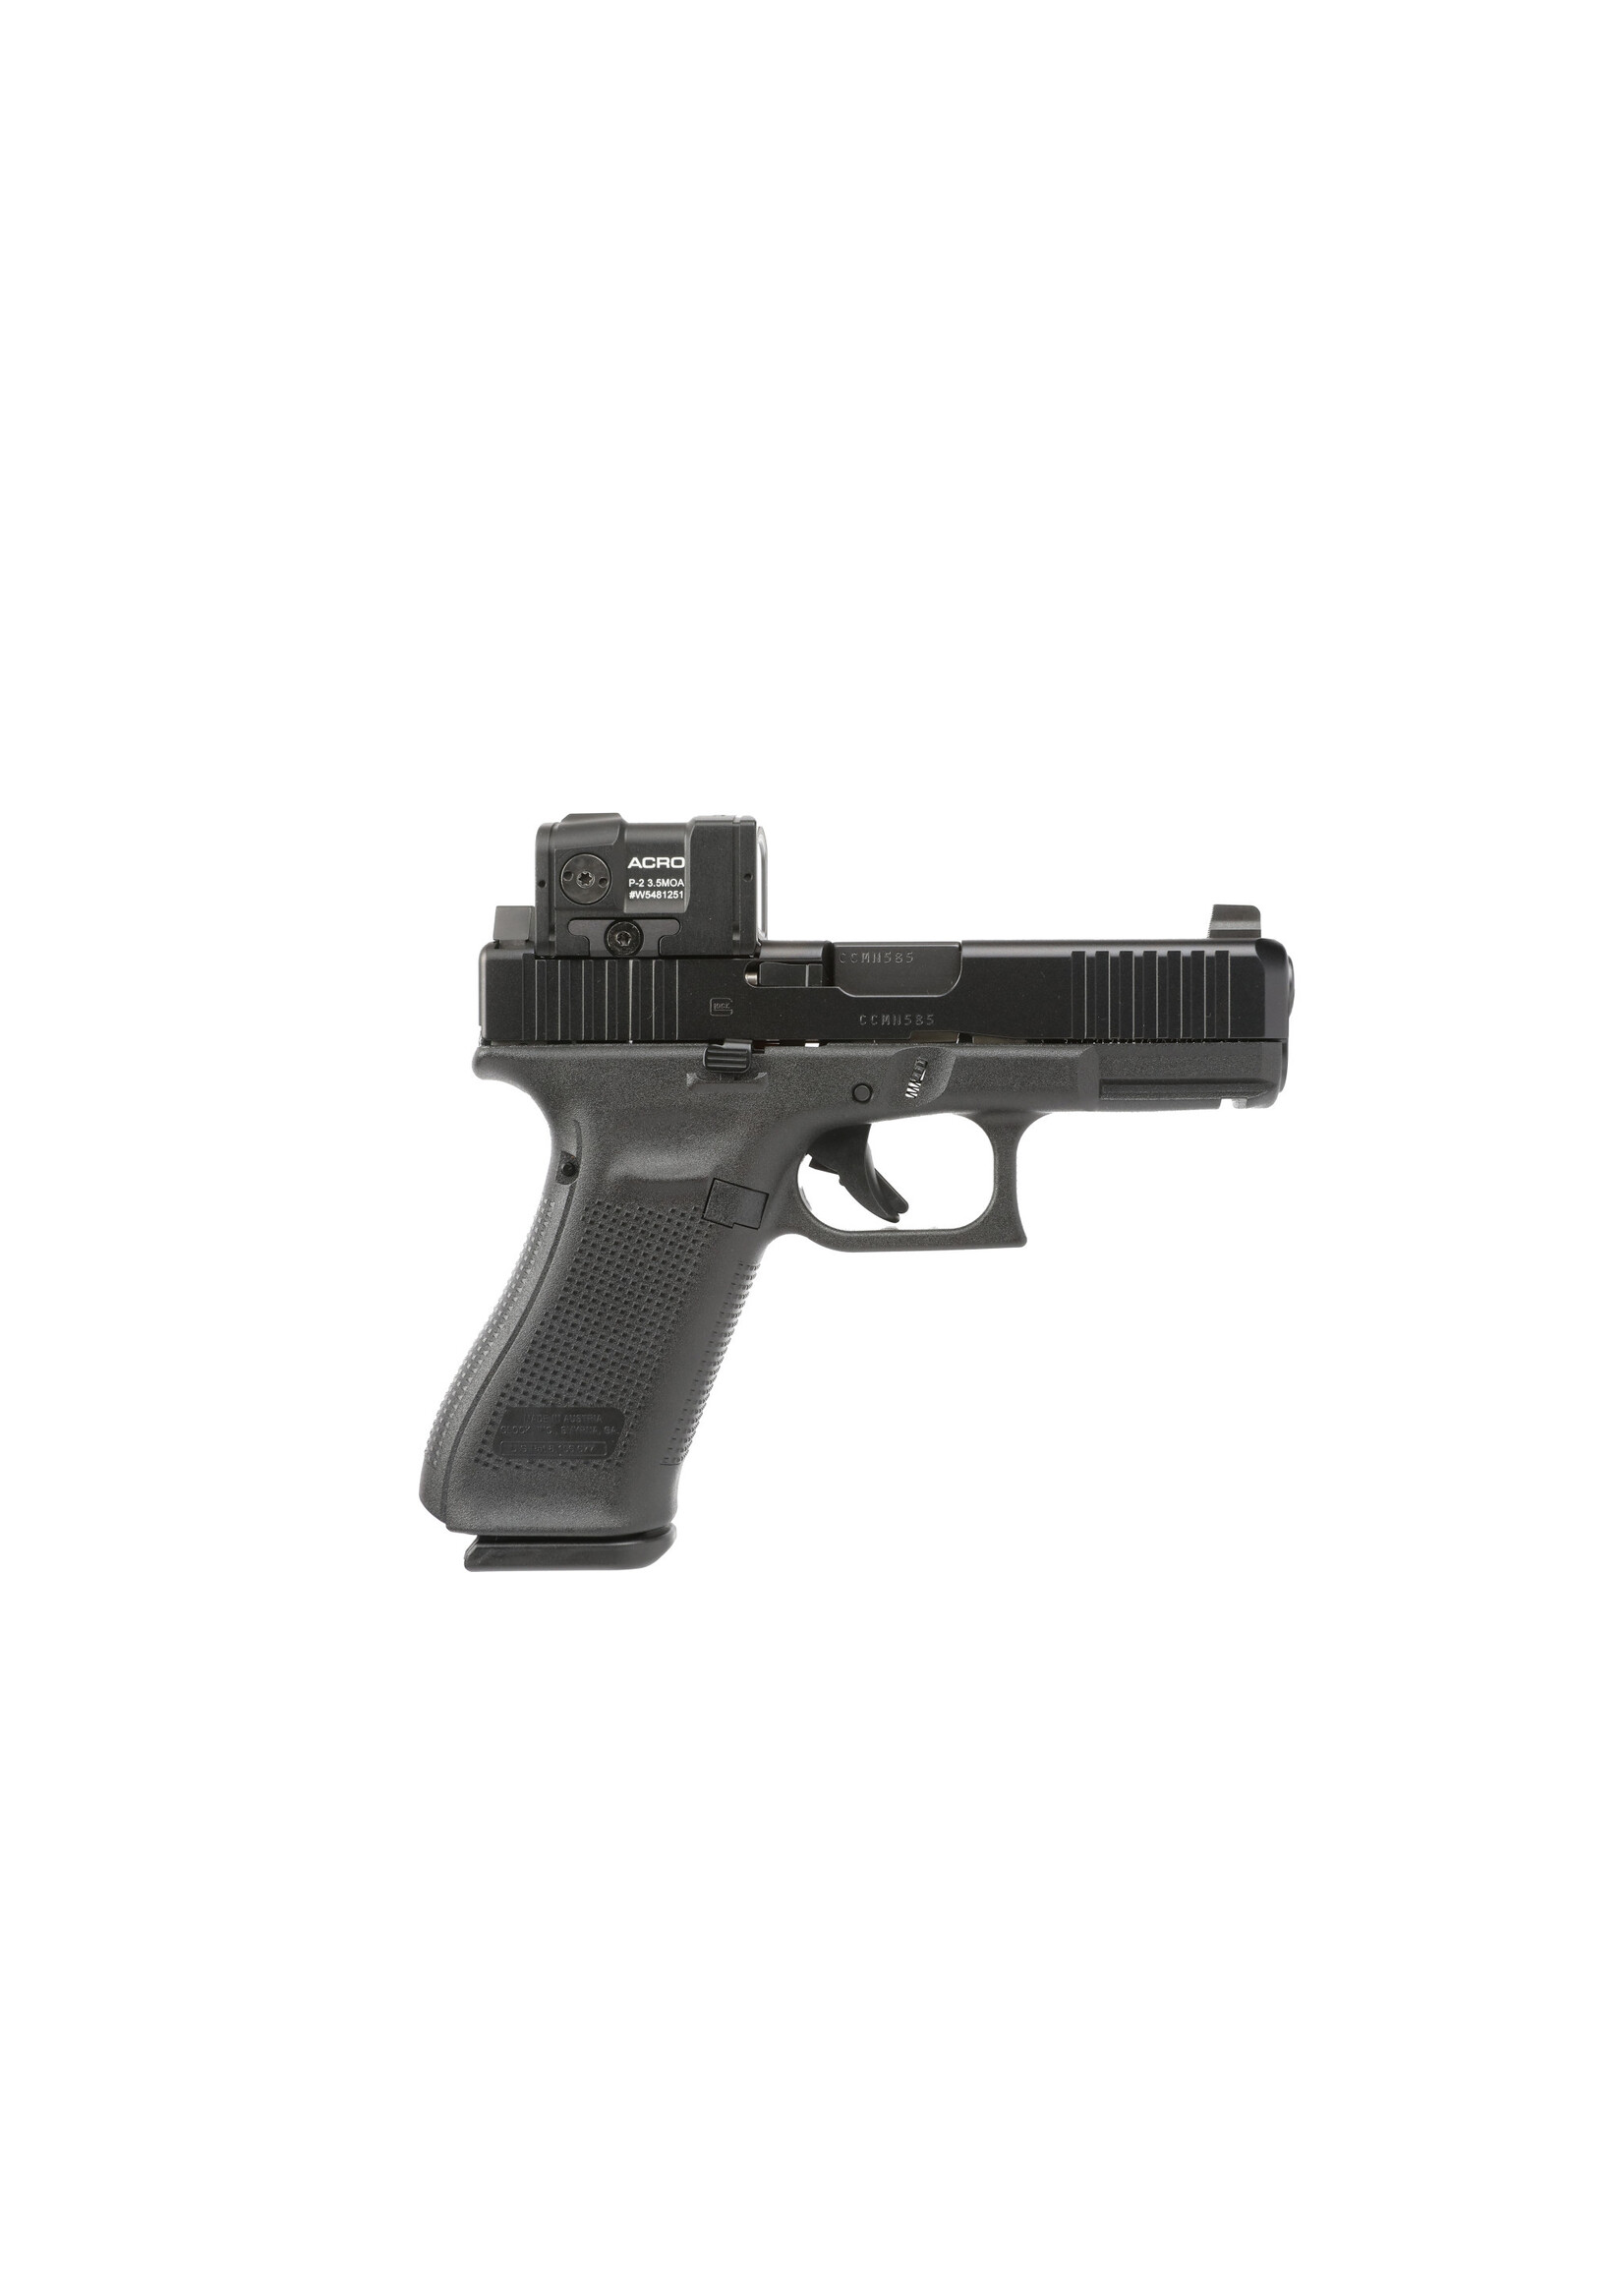 Glock Glock, G45 G5 MOS, Semi-automatic, Striker Fired, Polymer Framed Pistol, Compact, 9MM, 4.02" Barrel, DLC Finish, Black, Interchangeable Backstraps, Ameriglo Suppressor Sights, 17 Rounds, 2 Magazines, Includes Aimpoint ACRO P-2